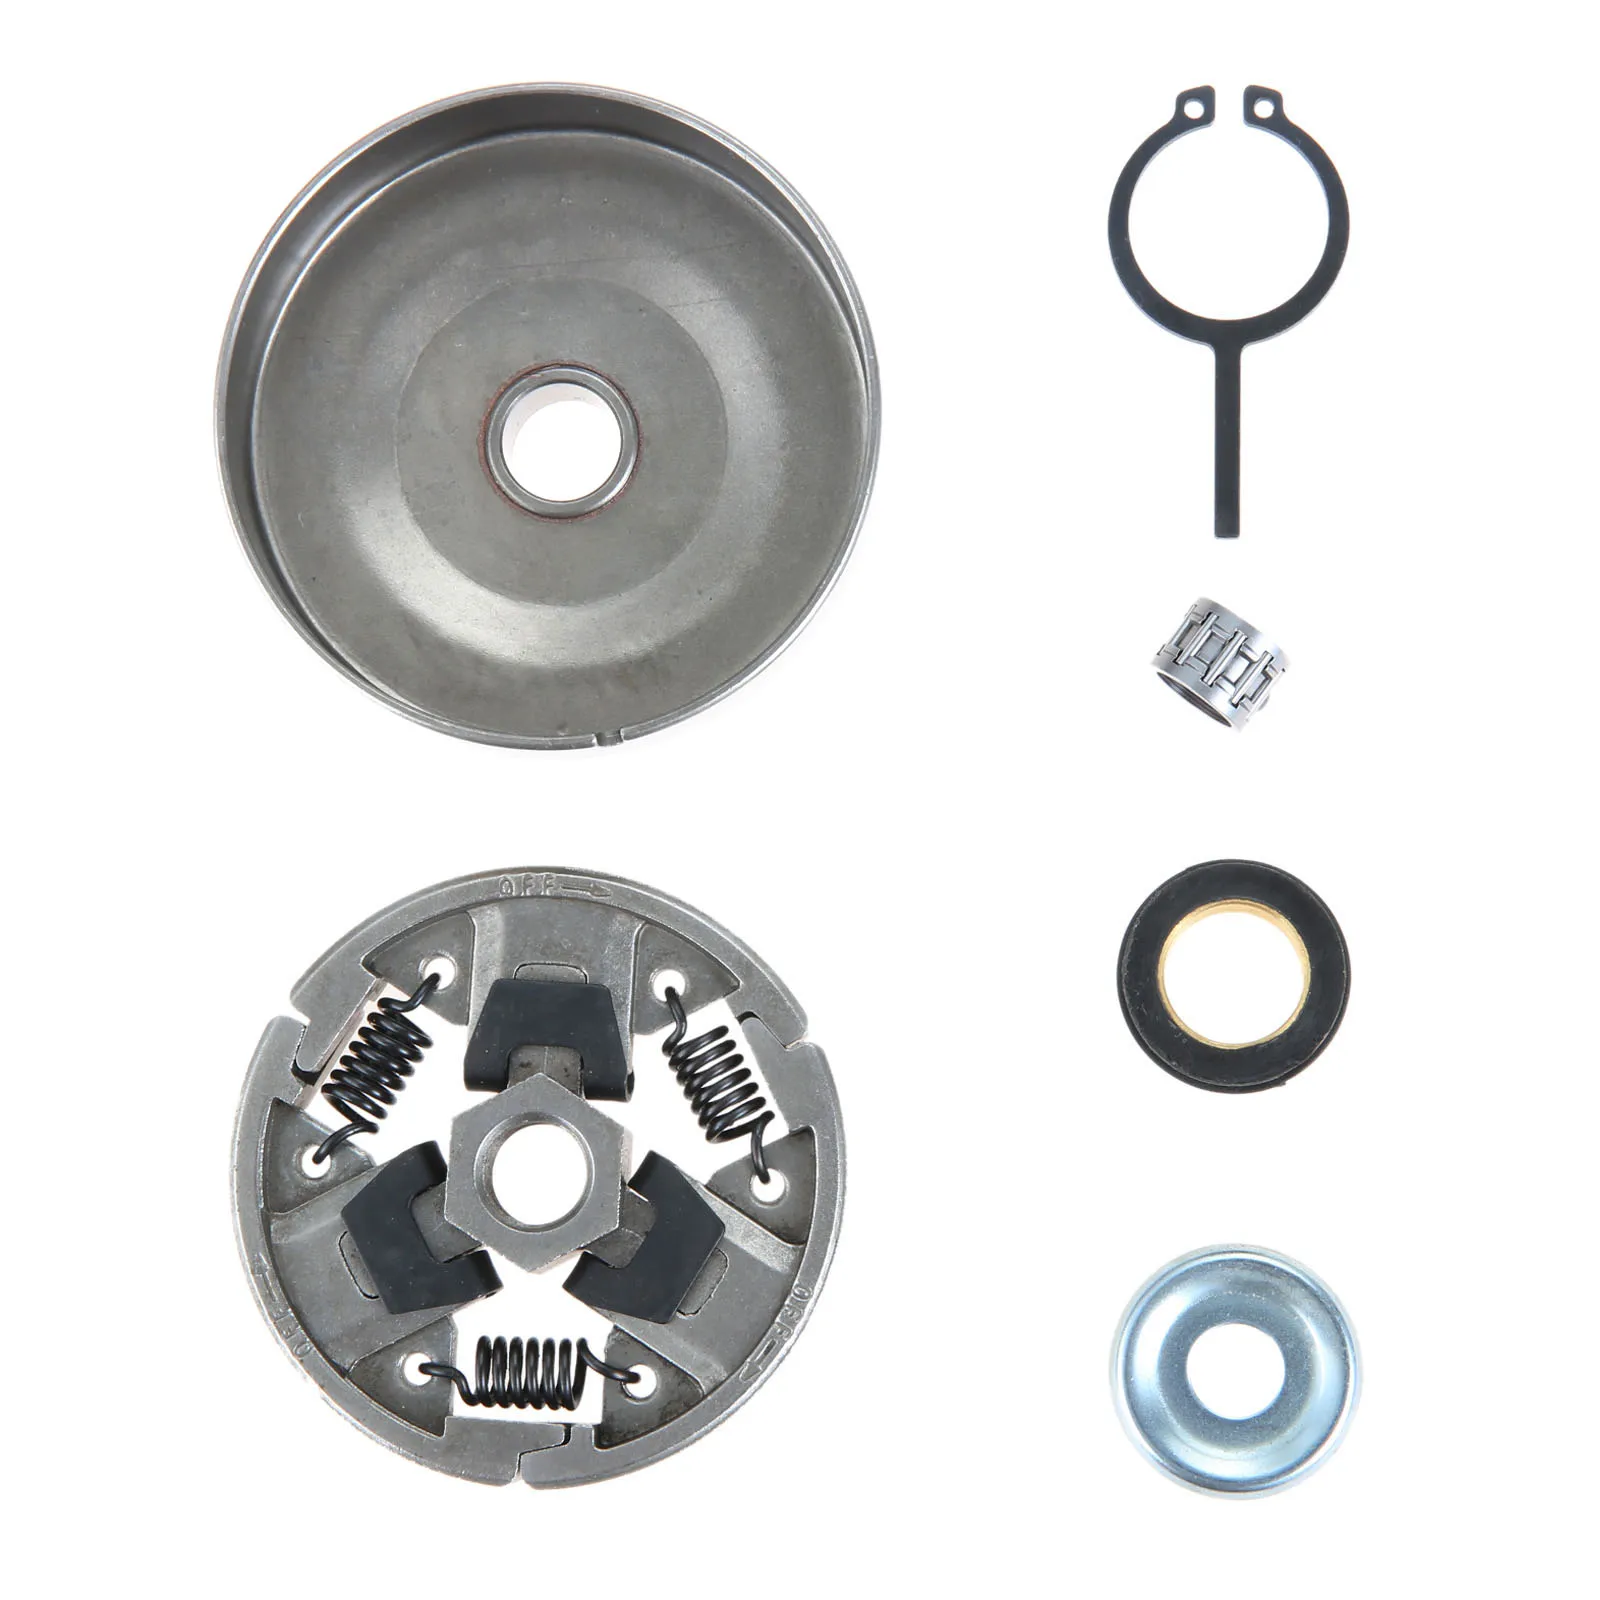 

Chainsaw Clutch and Sprocket Kit For Stihl MS240 MS260 Clutch Assembly Replaces OEM 1121 160 2051 Replacements